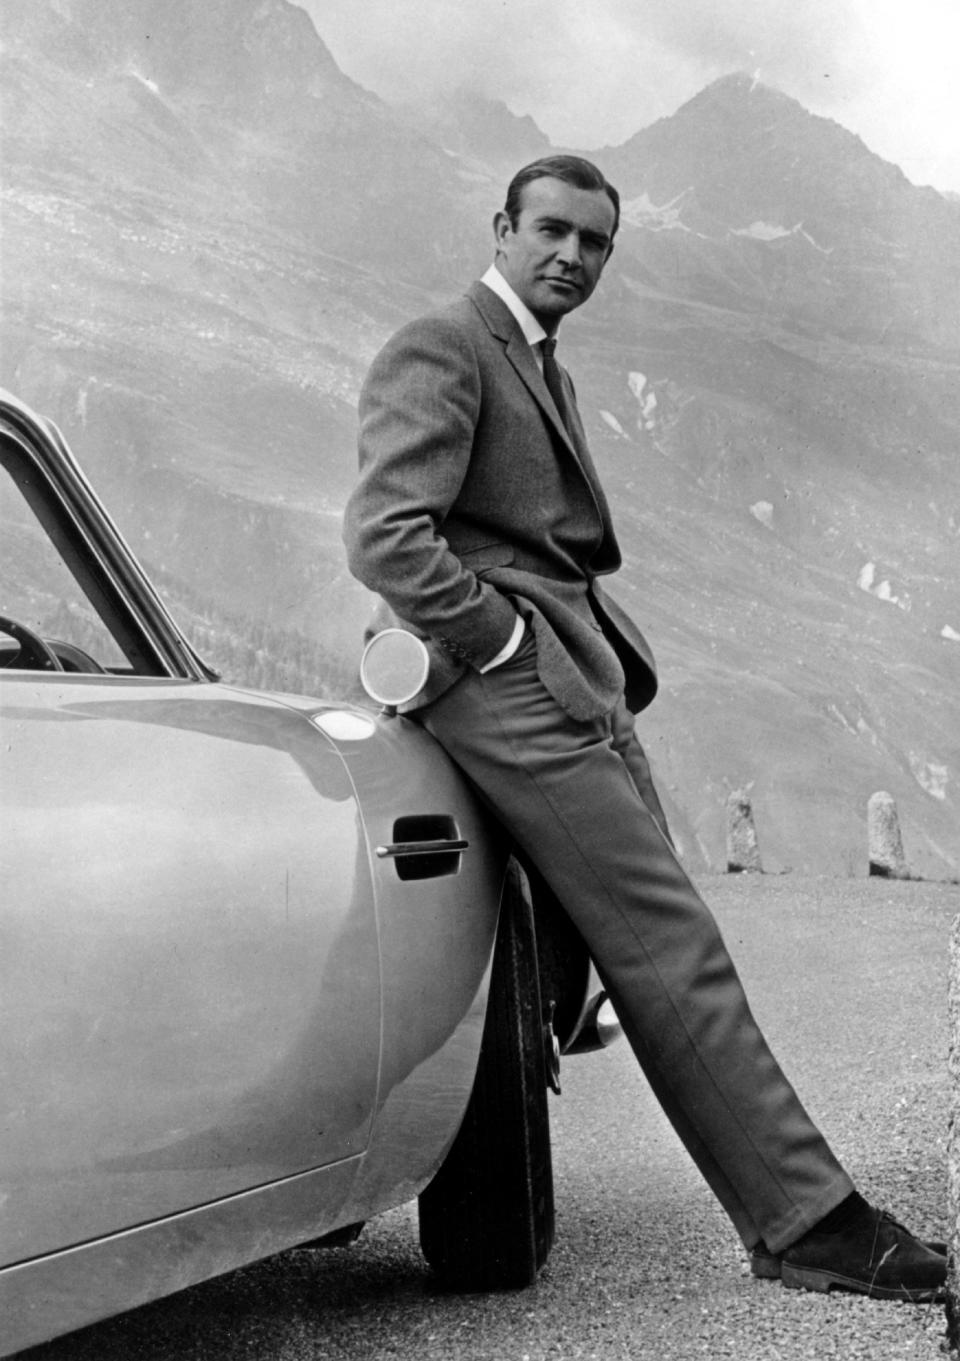 Connery as James Bond, posing next to his Aston Martin DB5 in a scene from "Goldfinger." (Photo: Michael Ochs Archives via Getty Images)